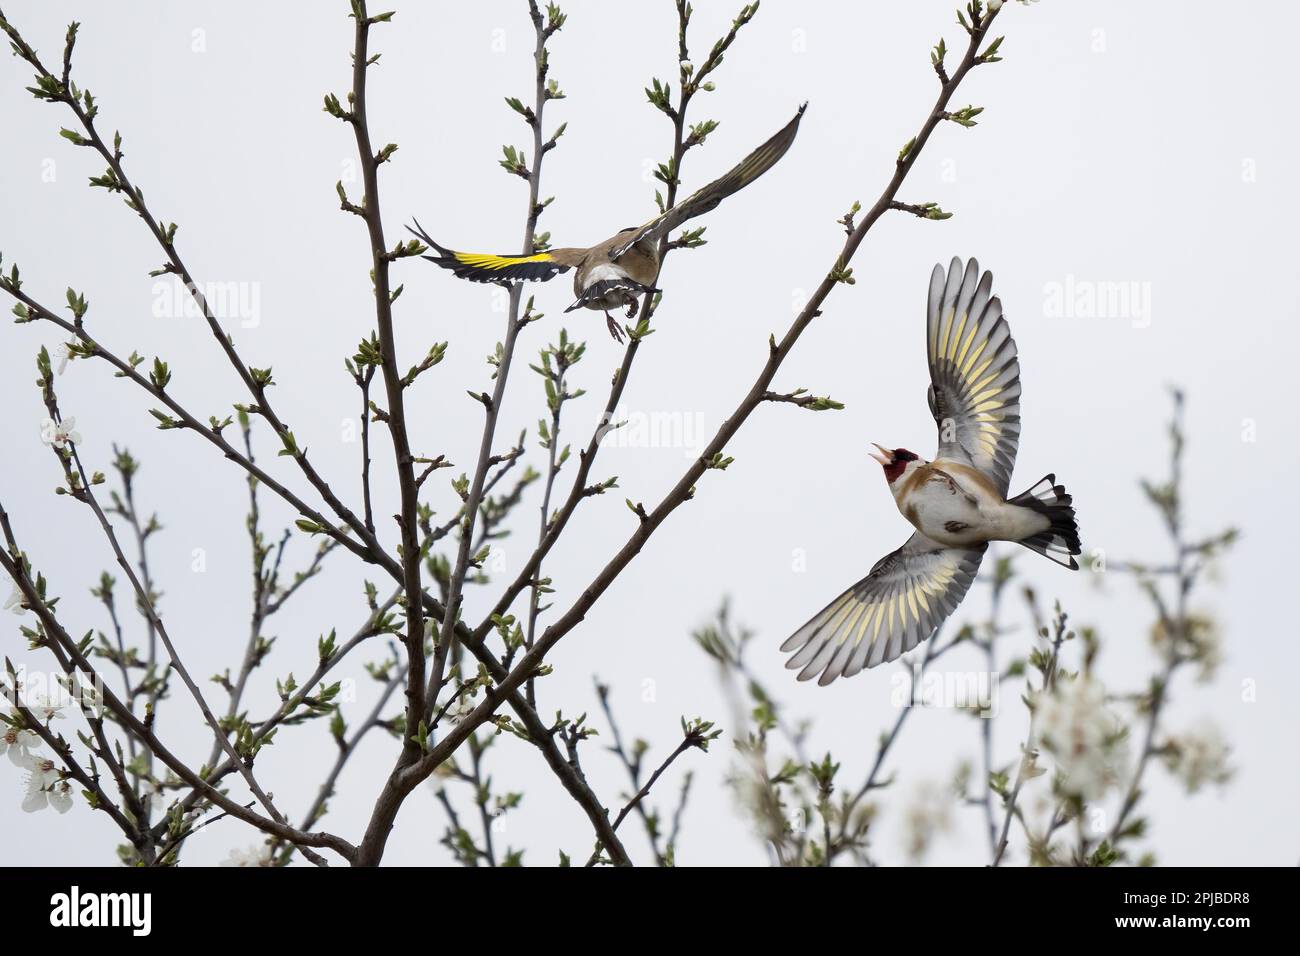 European goldfinch (Carduelis carduelis), approaching a branch, Hesse, Germany Stock Photo